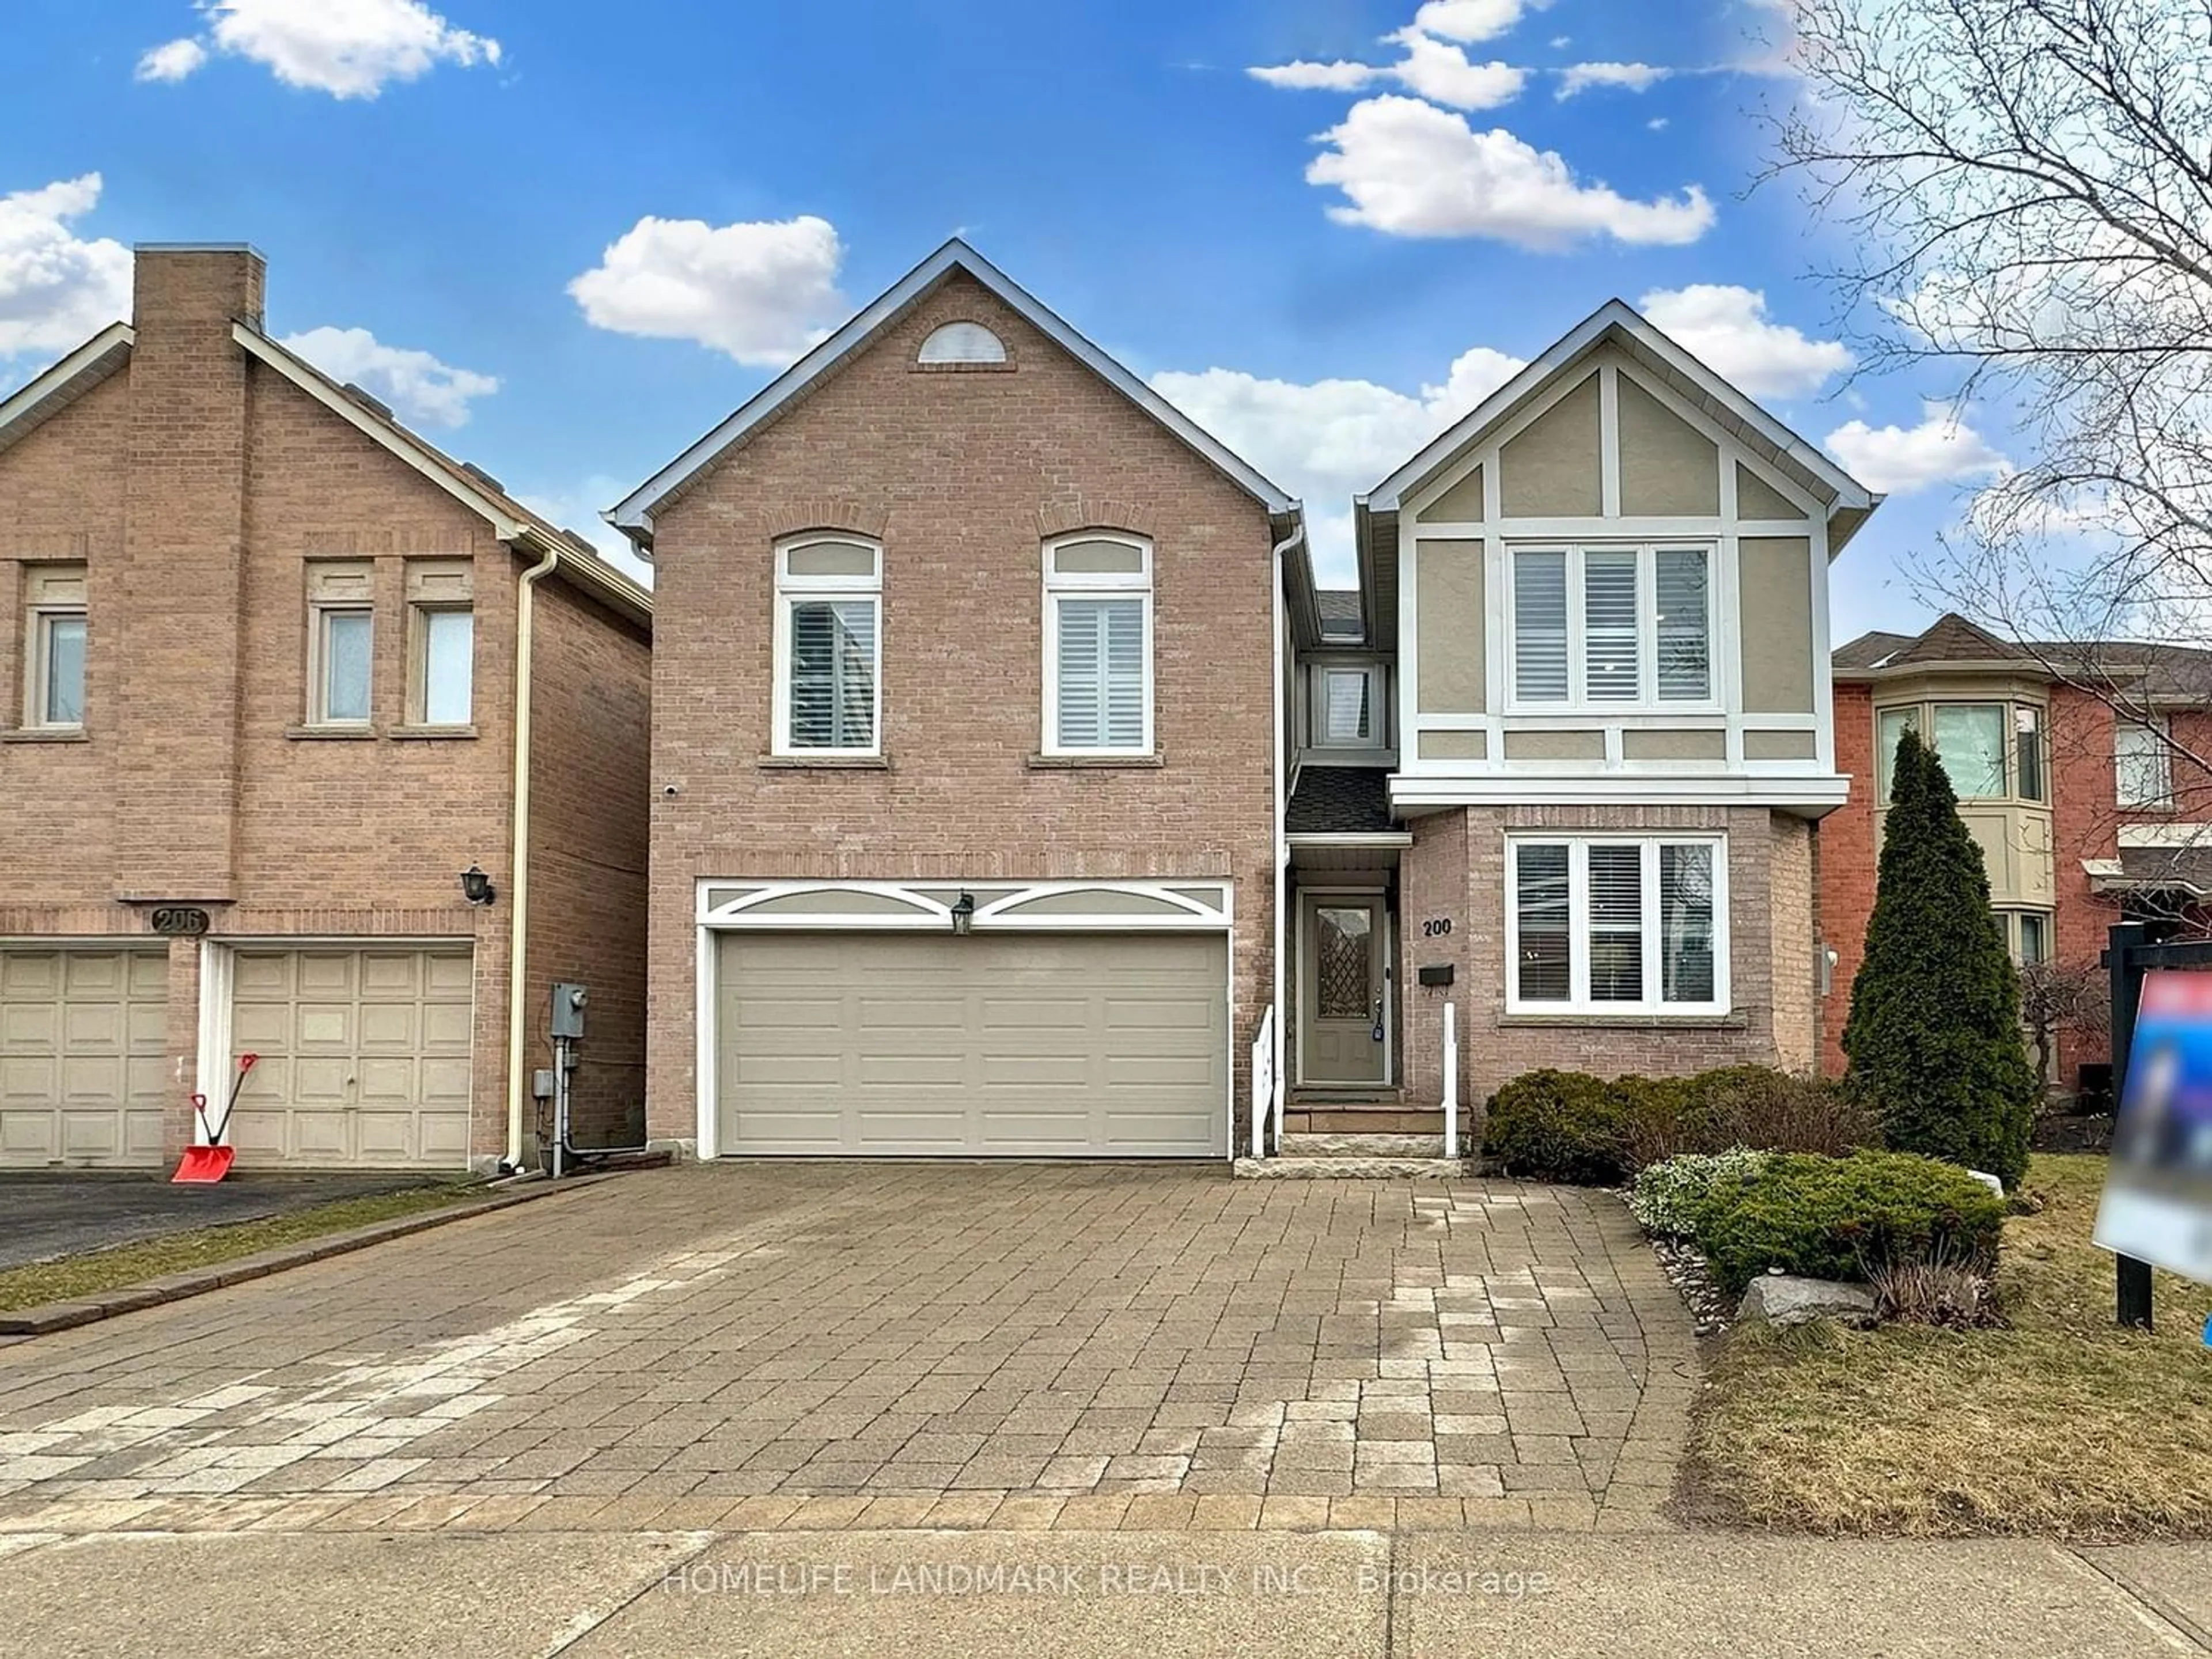 Home with brick exterior material for 200 Rosedale Heights Dr, Vaughan Ontario L4J 4W4